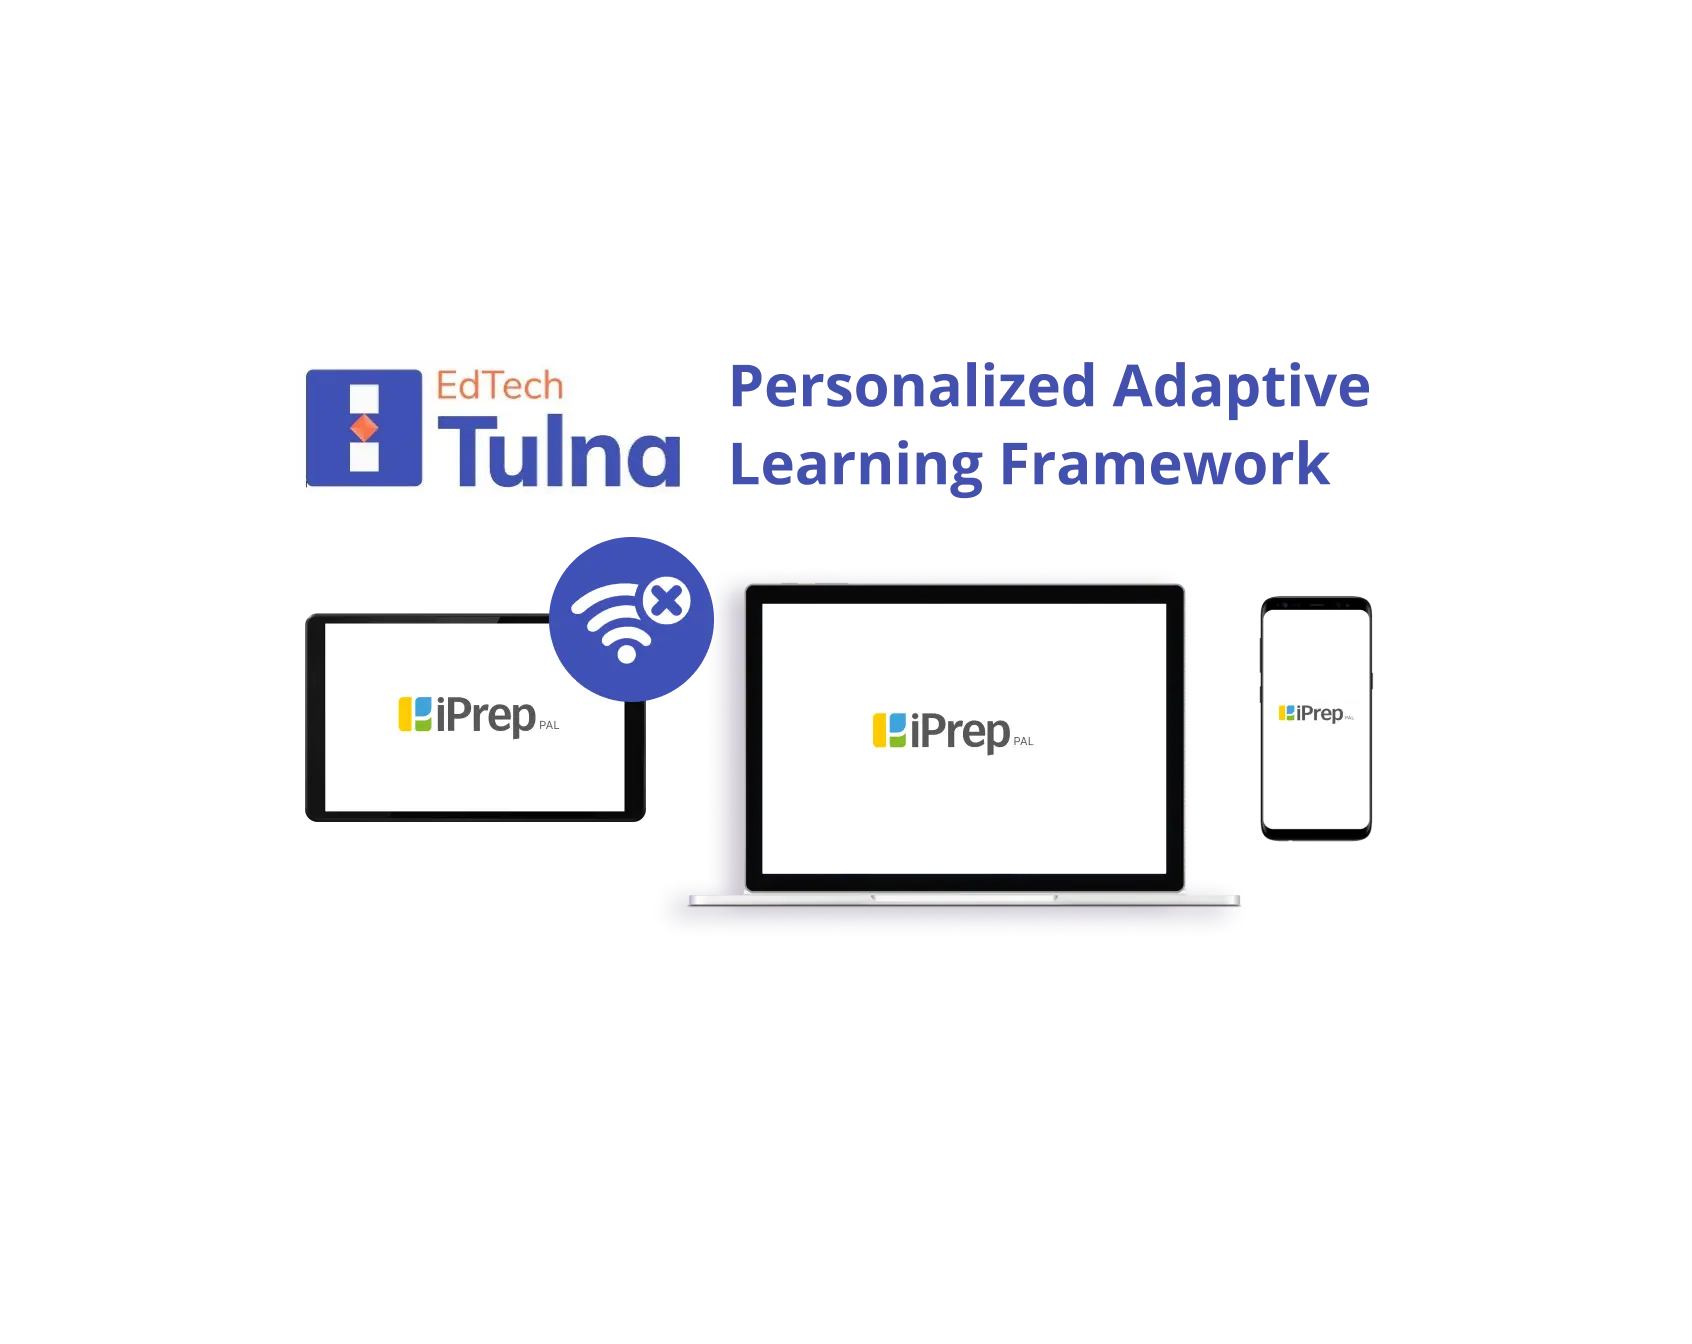 The portrayal of the Personalized Adaptive Learning Framework followed in iPrep PAL Called the Edtech Tulna